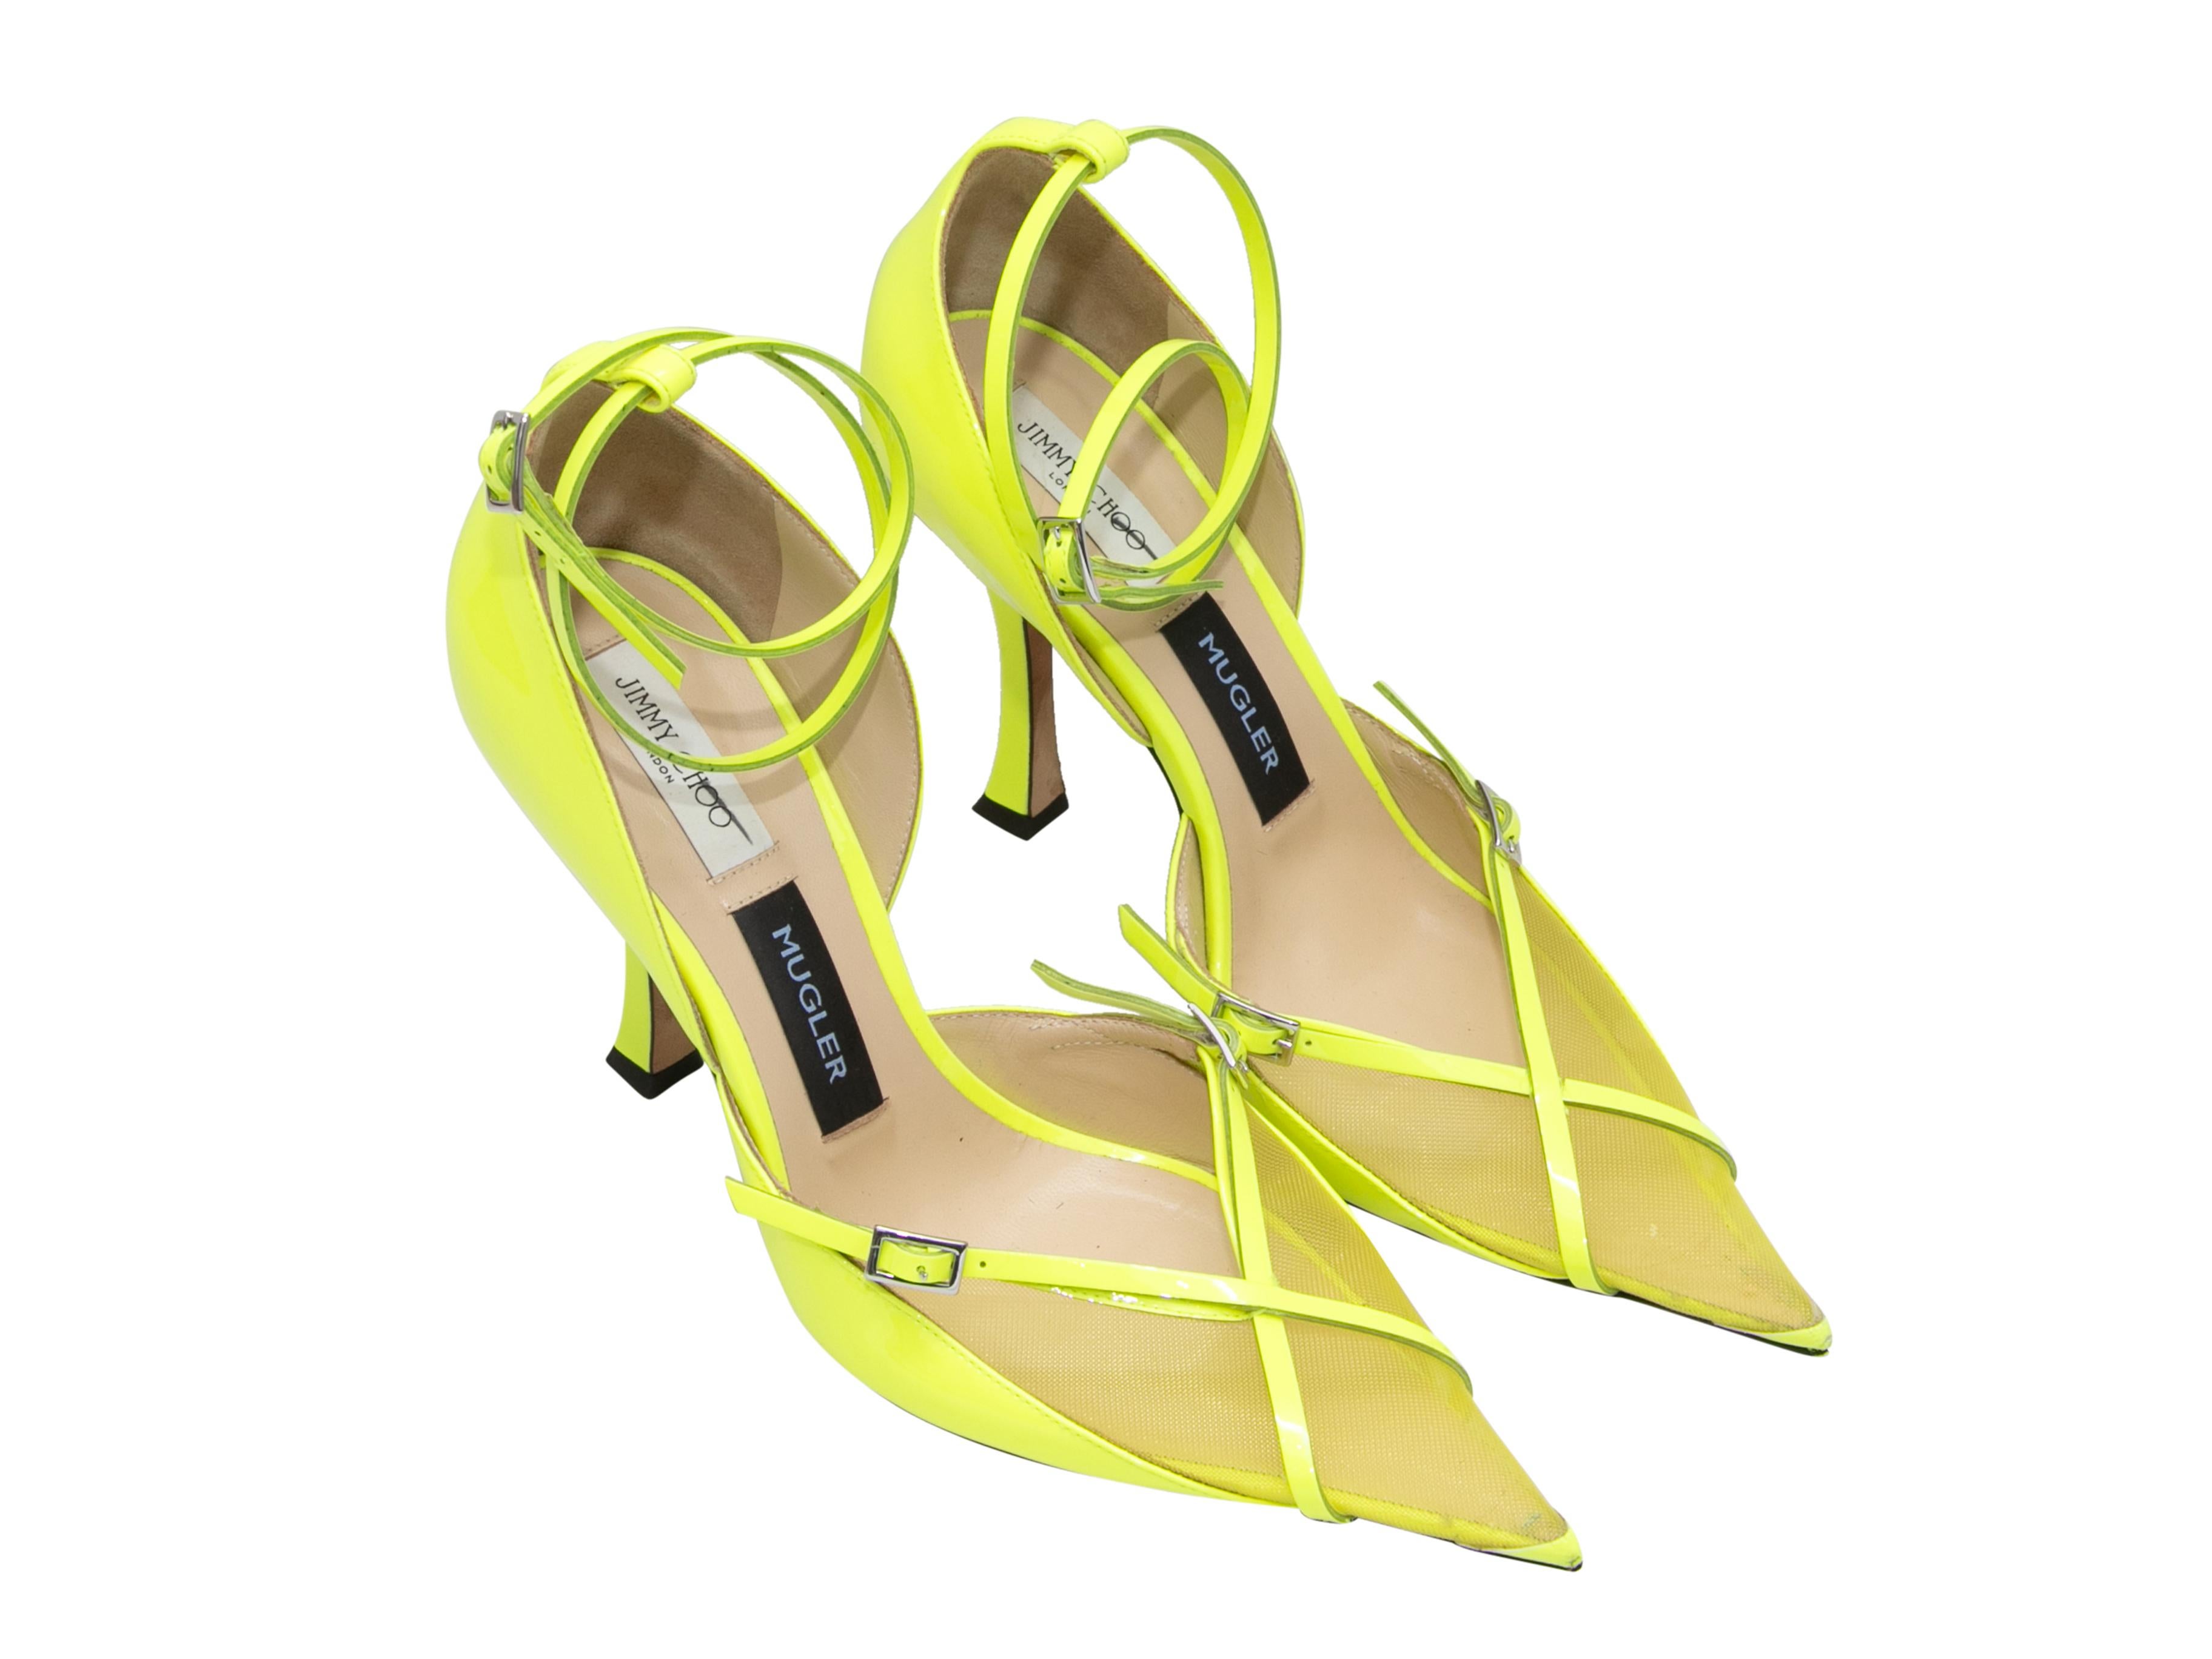 Neon yellow leather and mesh pointed-toe pumps by Mugler x Jimmy Choo. Silver-tone buckle accents at tops. Buckle closures at ankle straps. 4.25